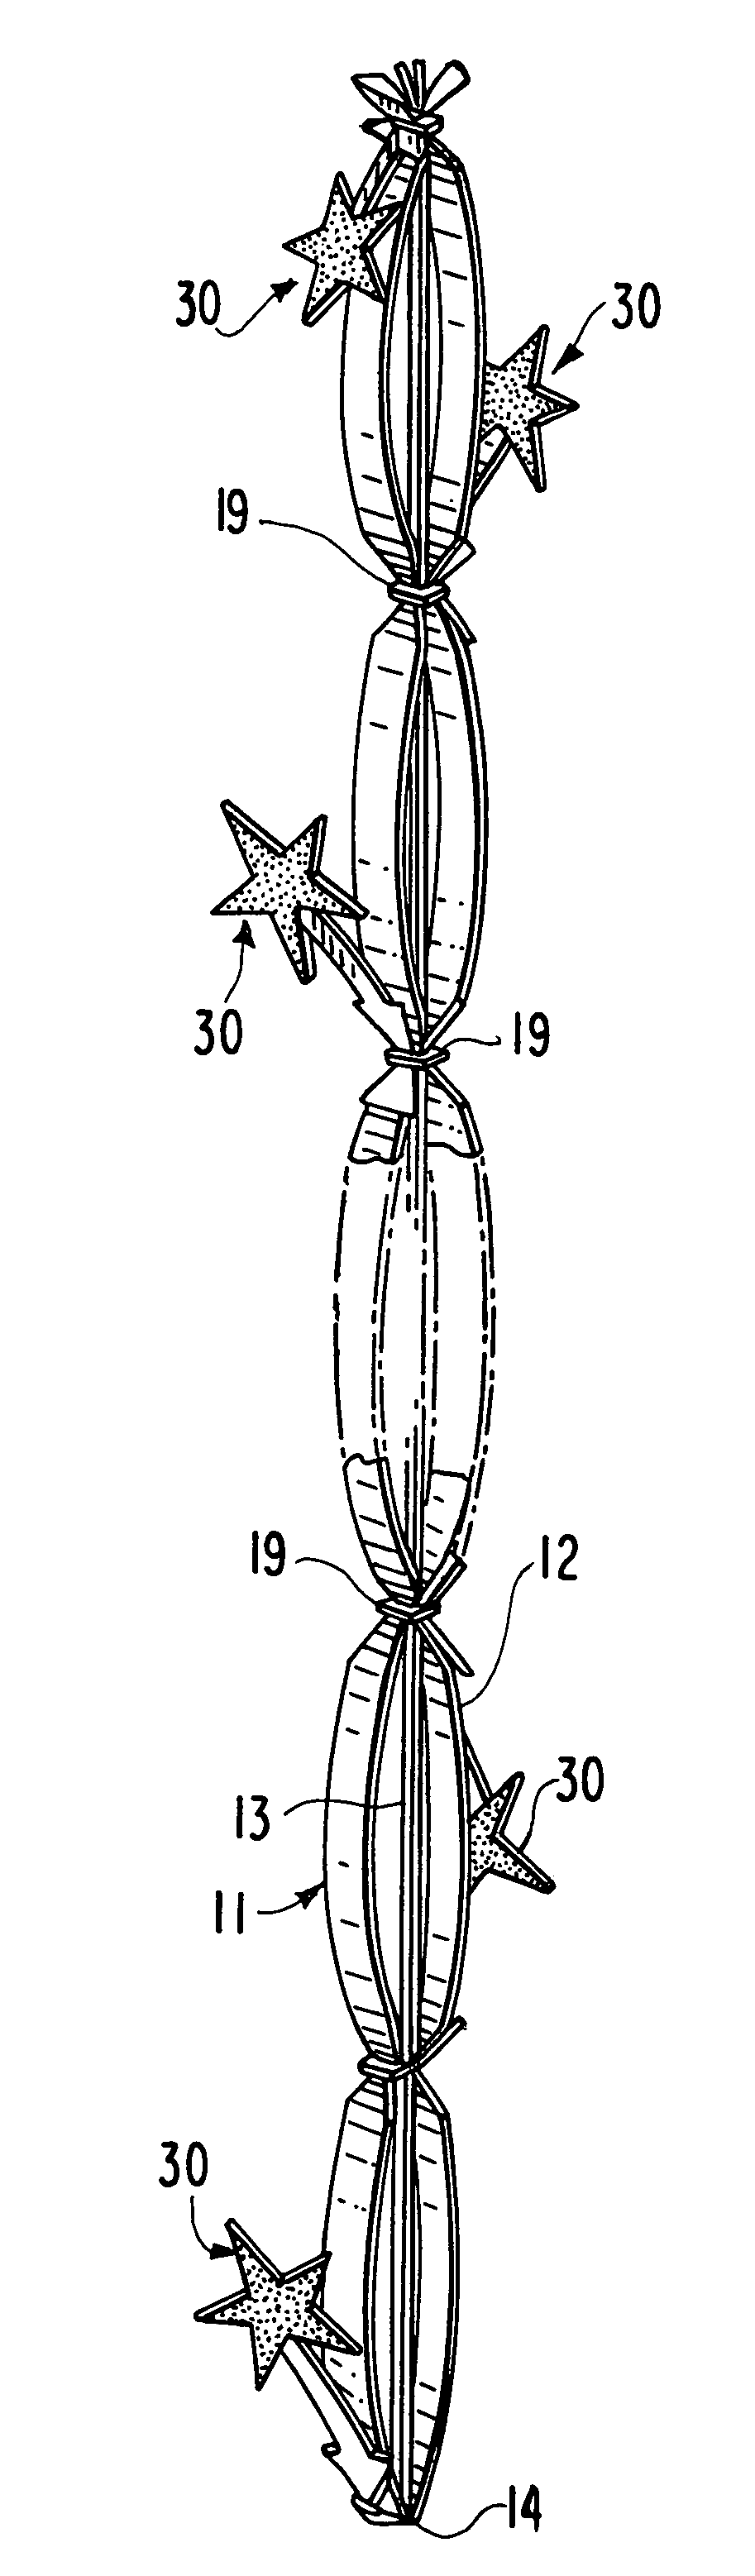 Ribbon assembly for forming a decorative bow